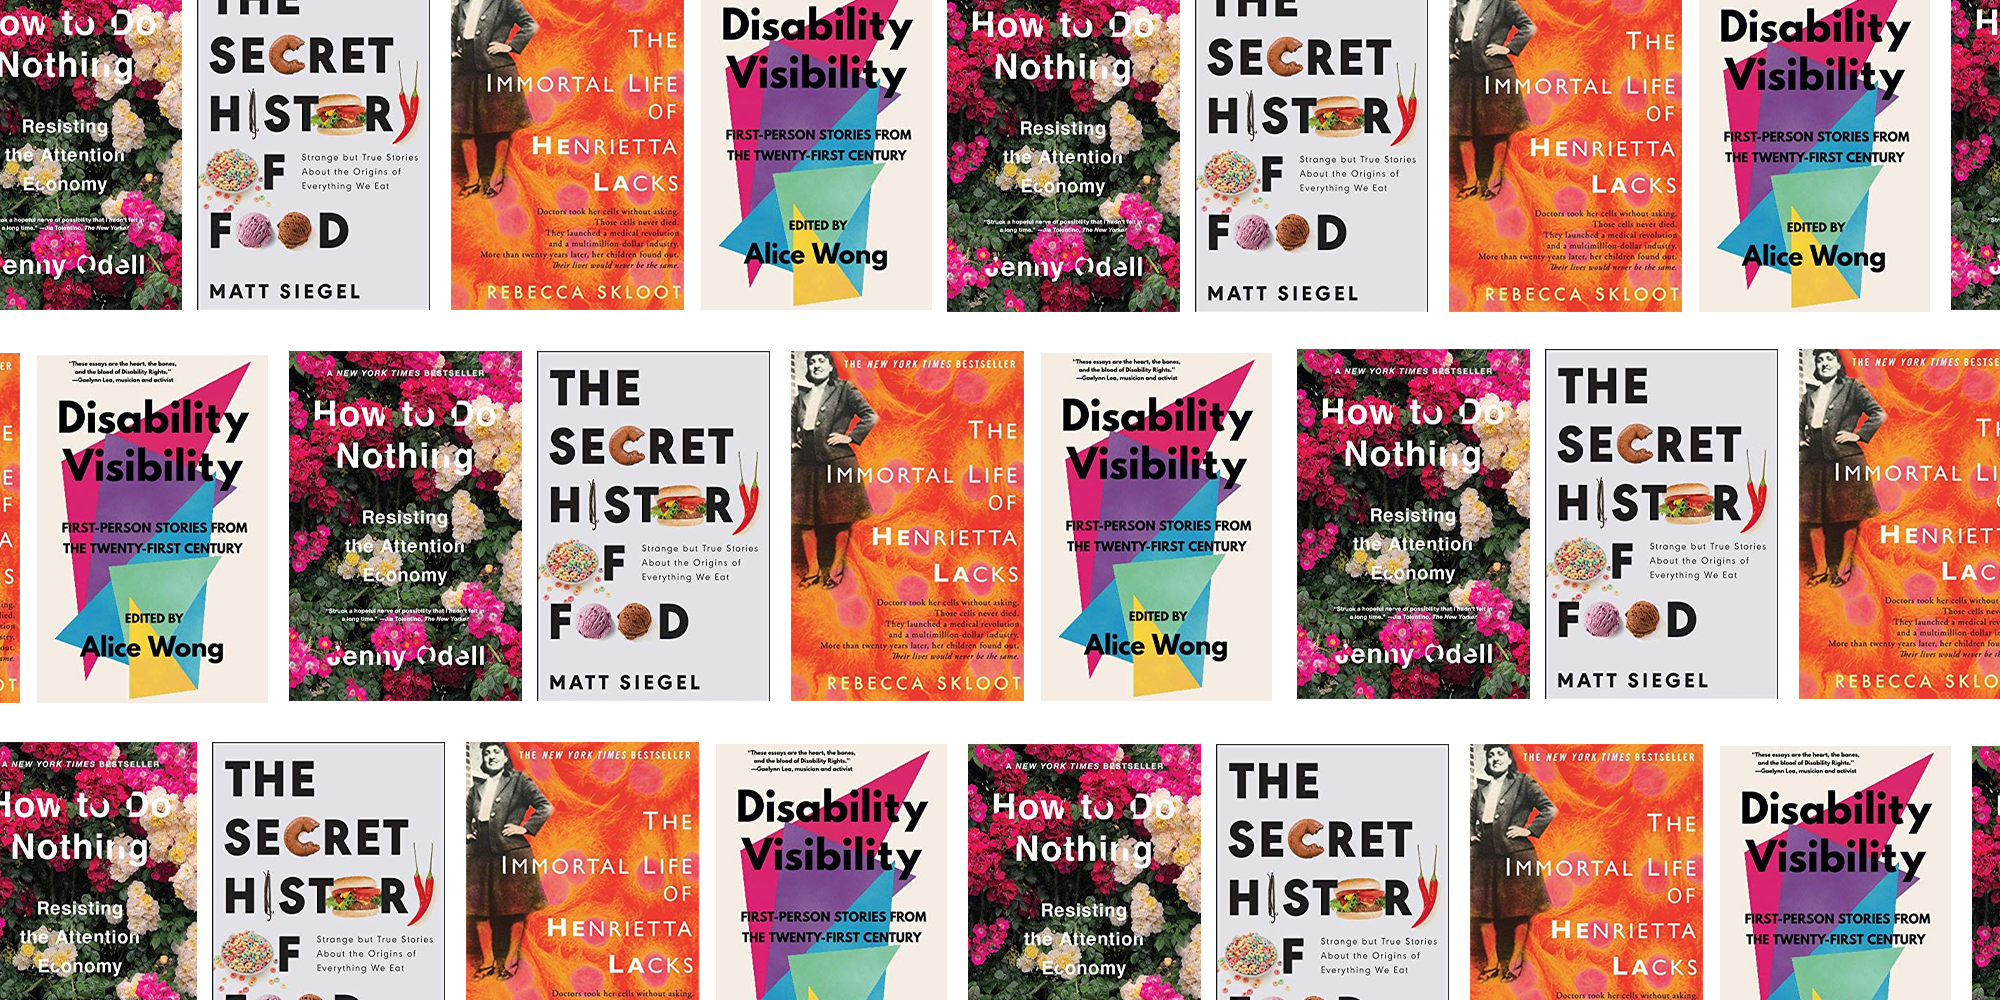 19 Best Nonfiction Books Coming Out in 2019 - 2019 Best Nonfiction Books